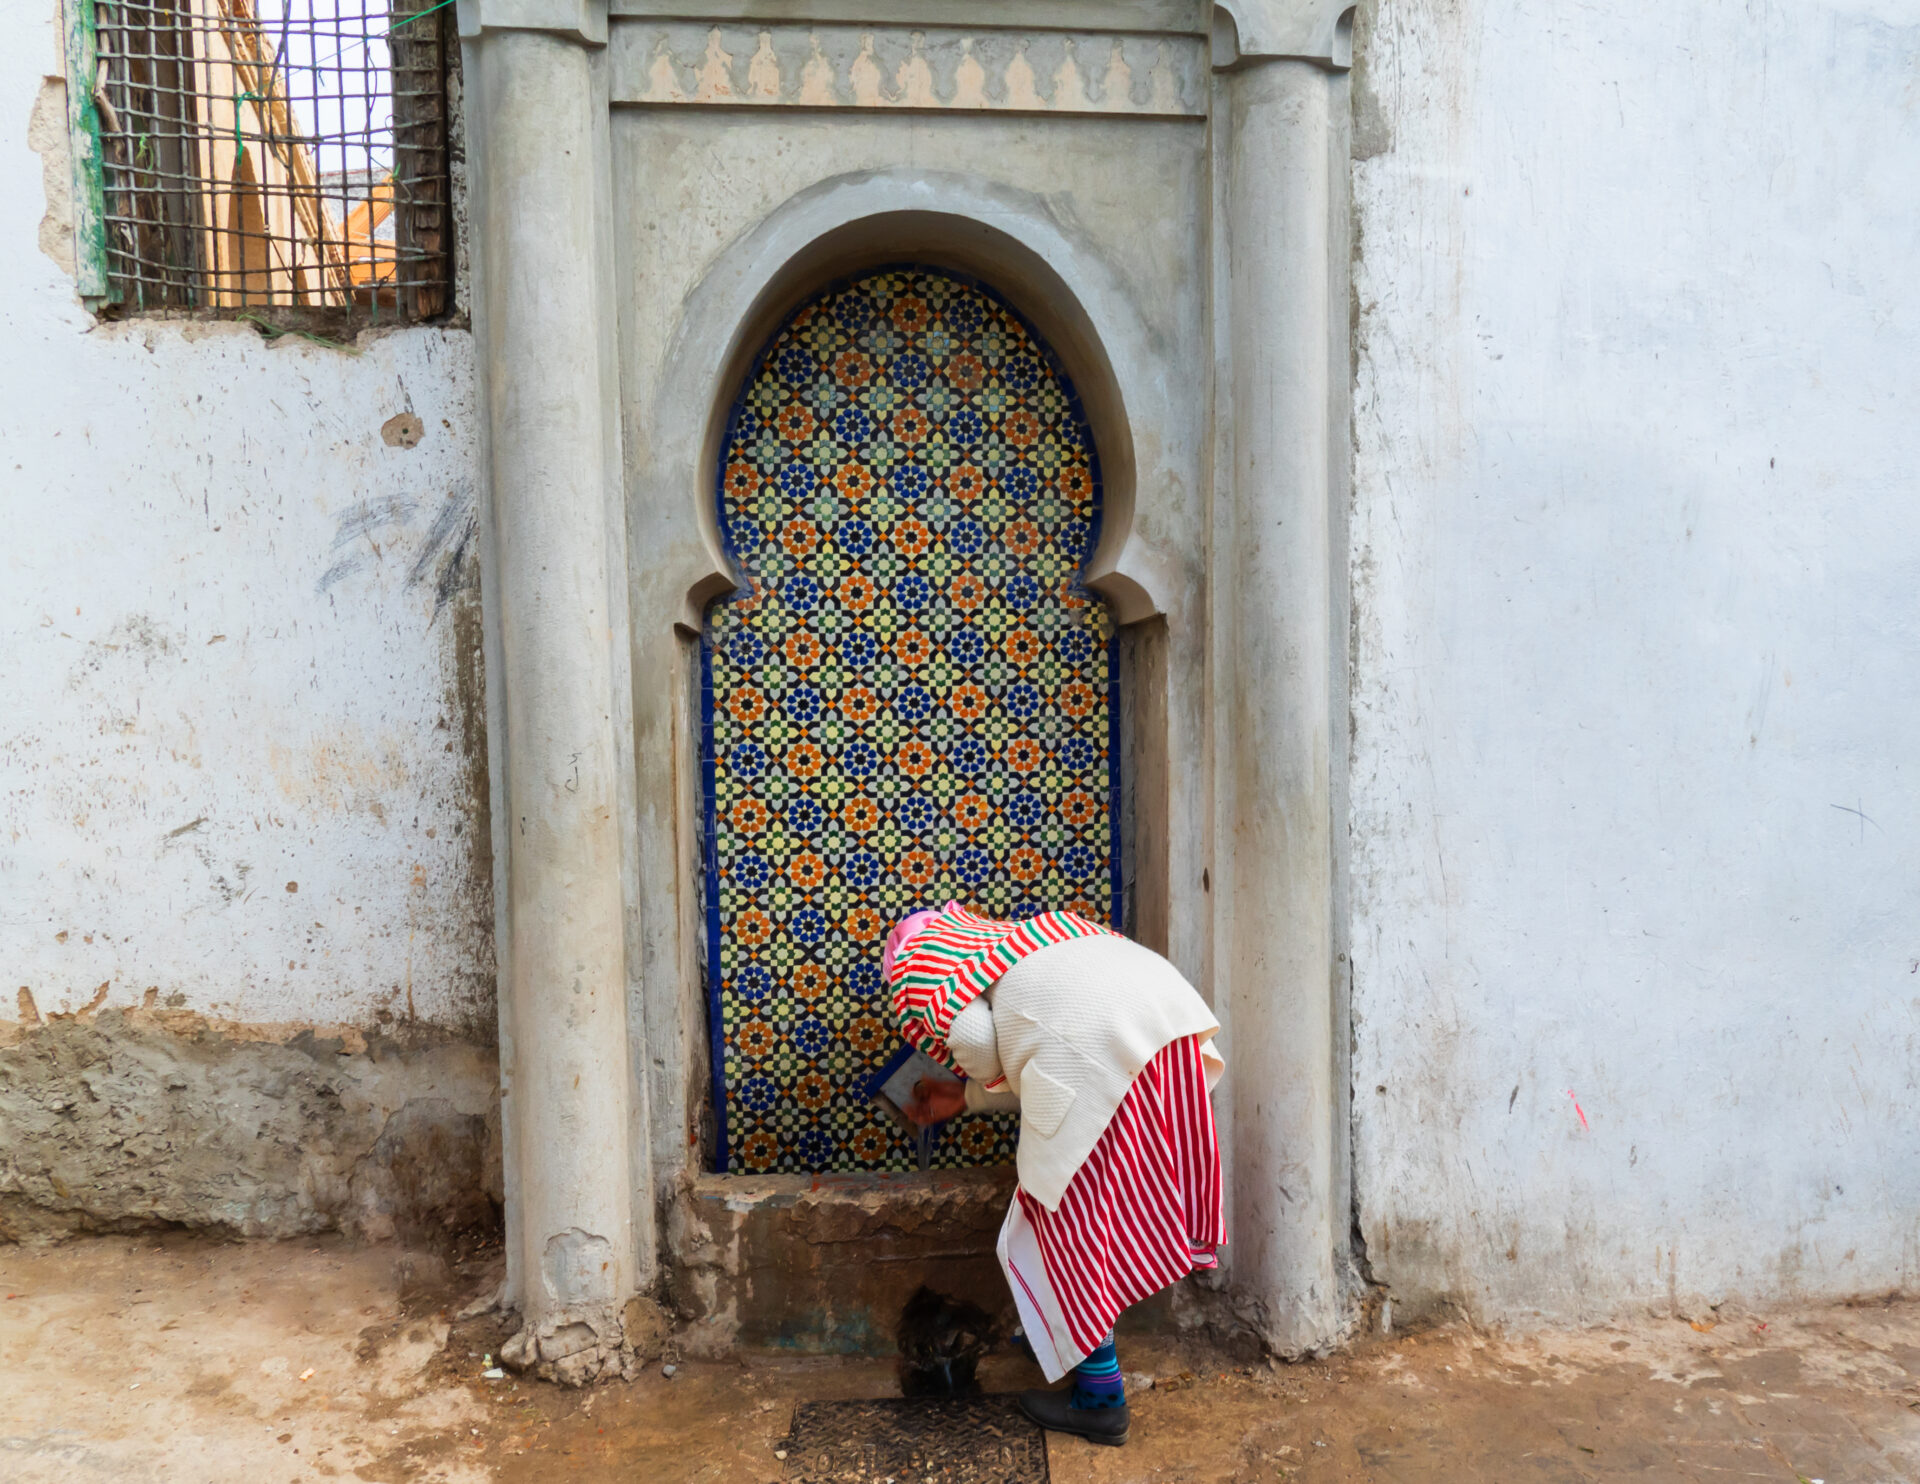 Woman drinking from a traditional fountain in Tetouan, Morocco